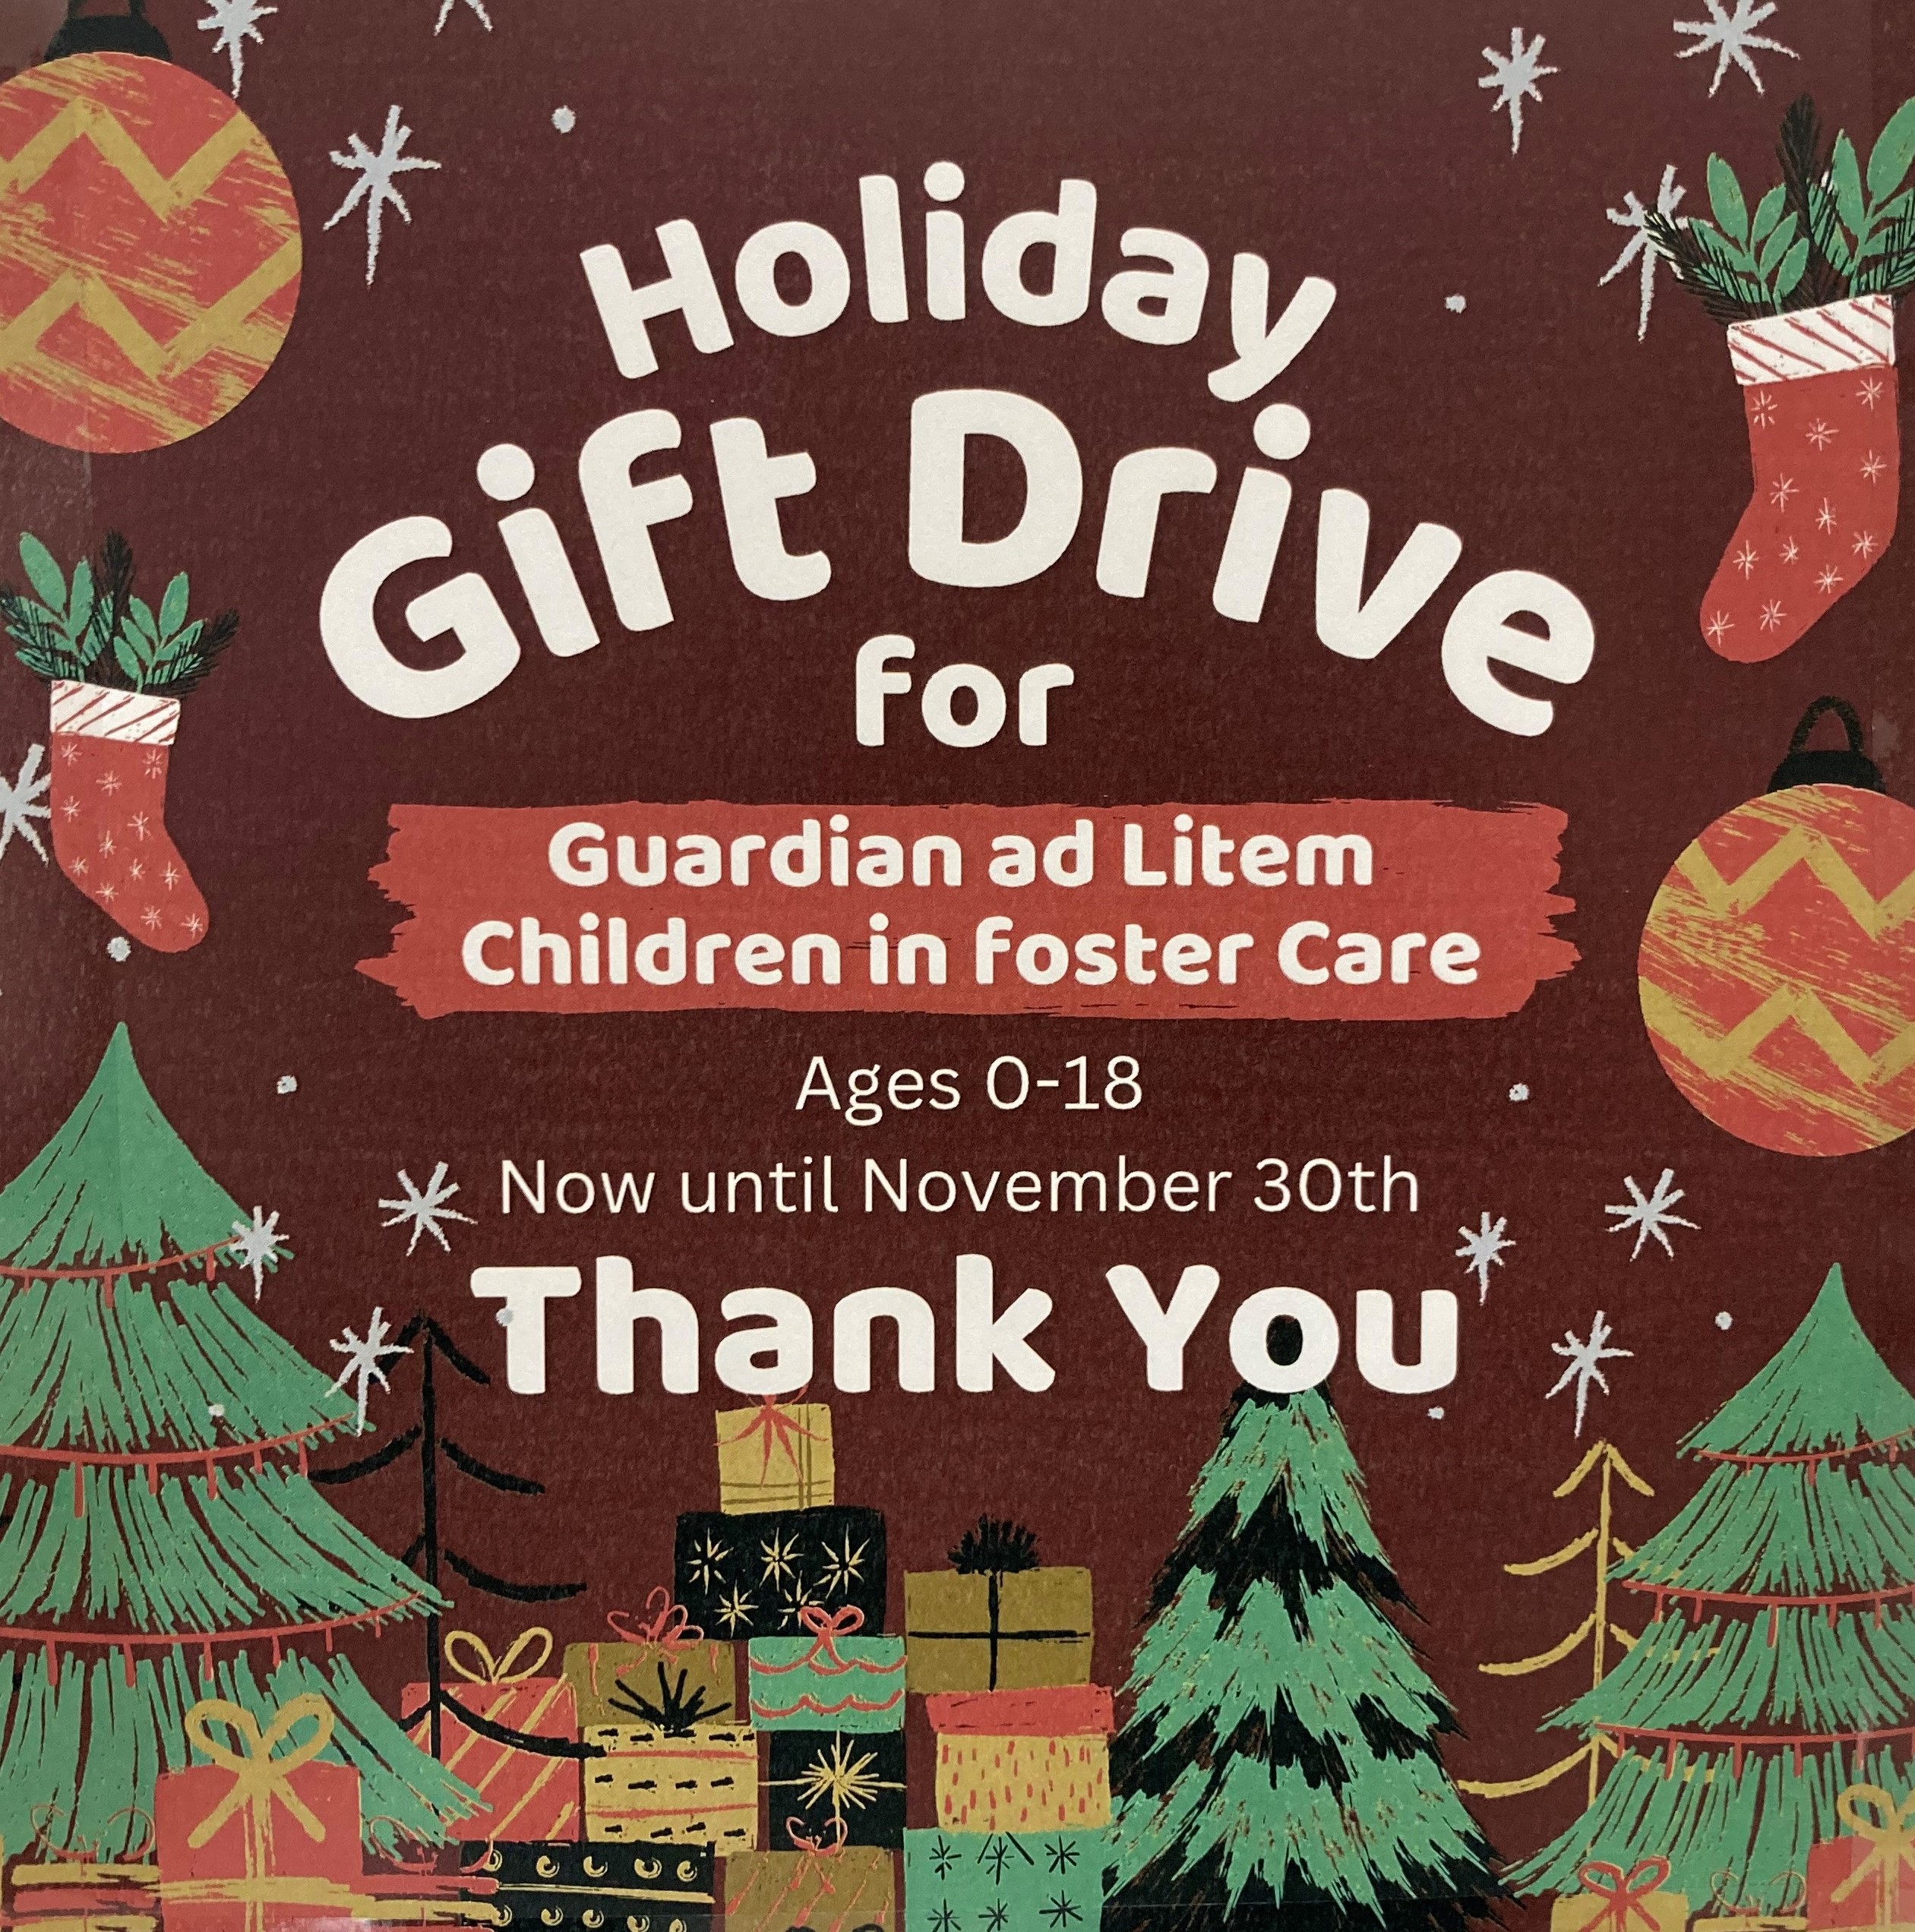  "Okeechobee Library is proud to be a drop off site for Guardian Ad Litem's Annual Holiday Gift Drive! We will be accepting donations of unwrapped toys and gift cards for ages 0-18, now through November 30th!"